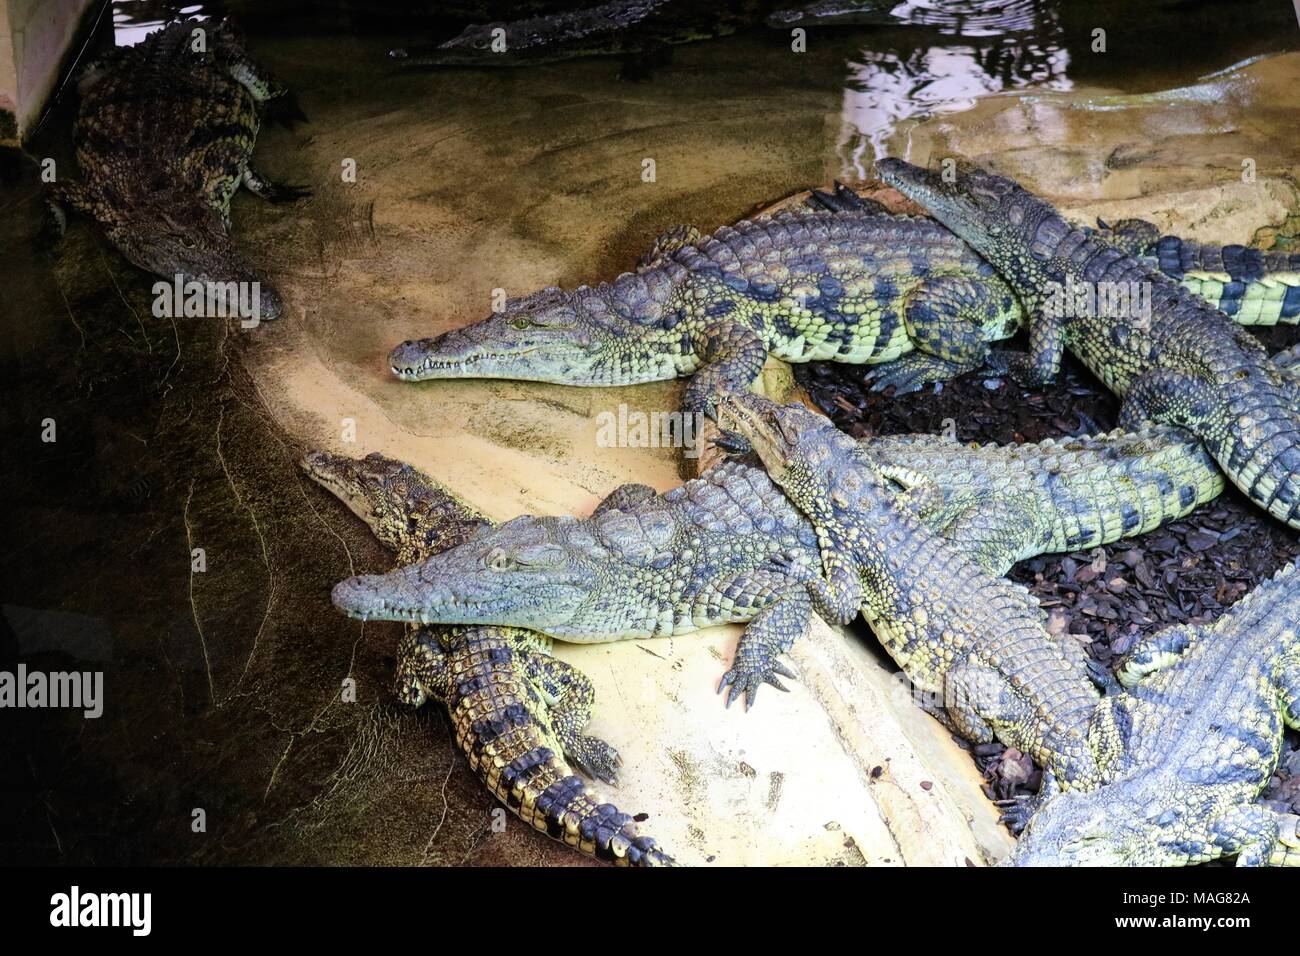 Bask / Float of Nile Crocodile at a visitors attraction Stock Photo